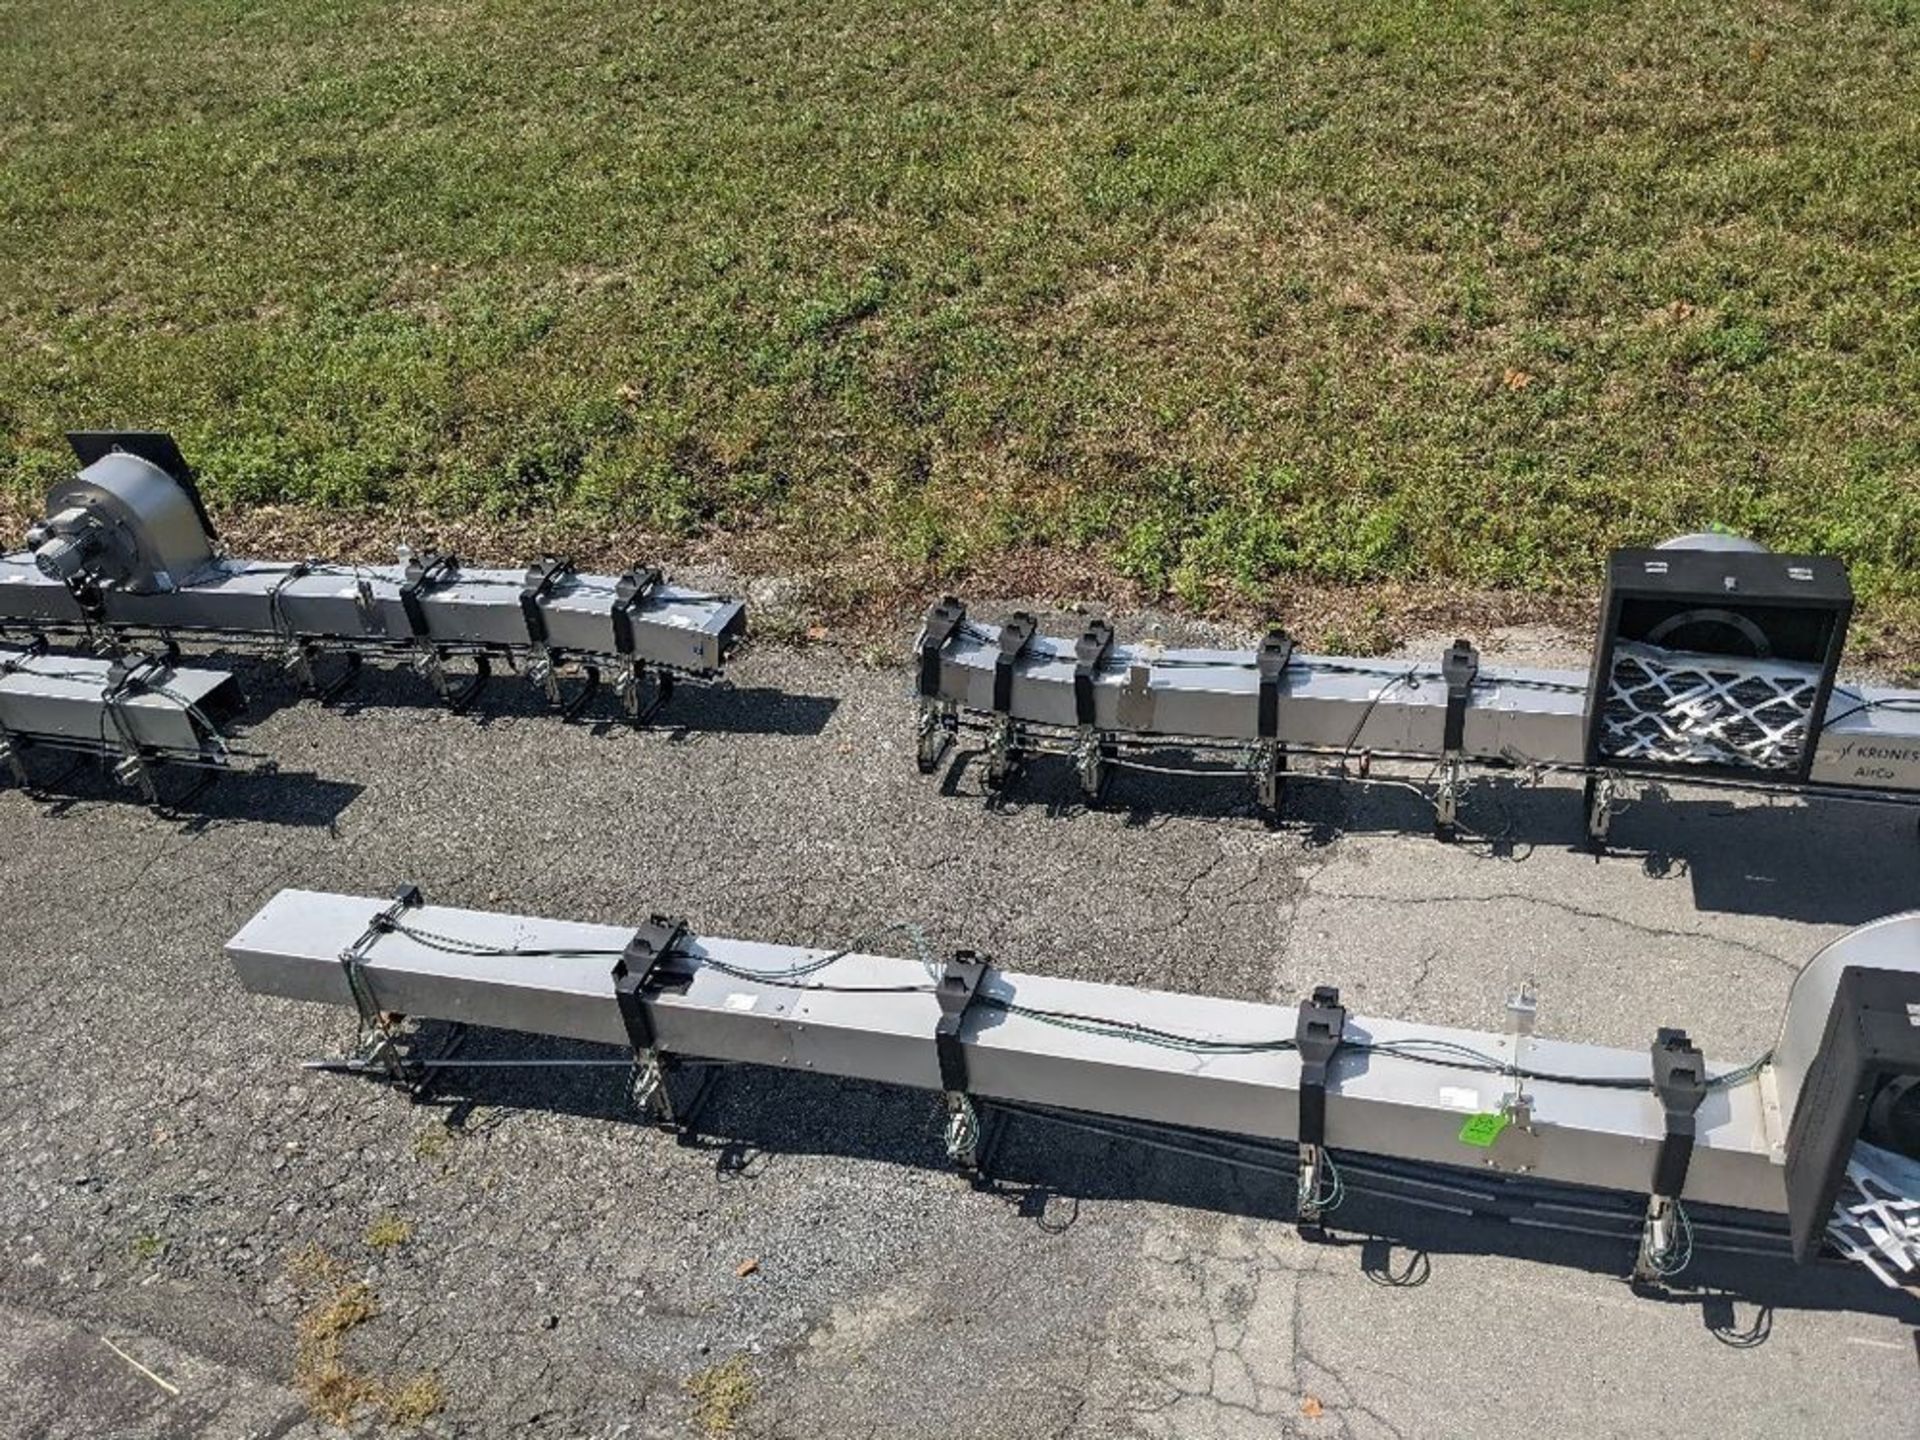 Krones Air Conveyor Sections Including (4) 20' Straight w/ Blowers (1) 36’ Straight w/ Blowers (1) - Image 3 of 9